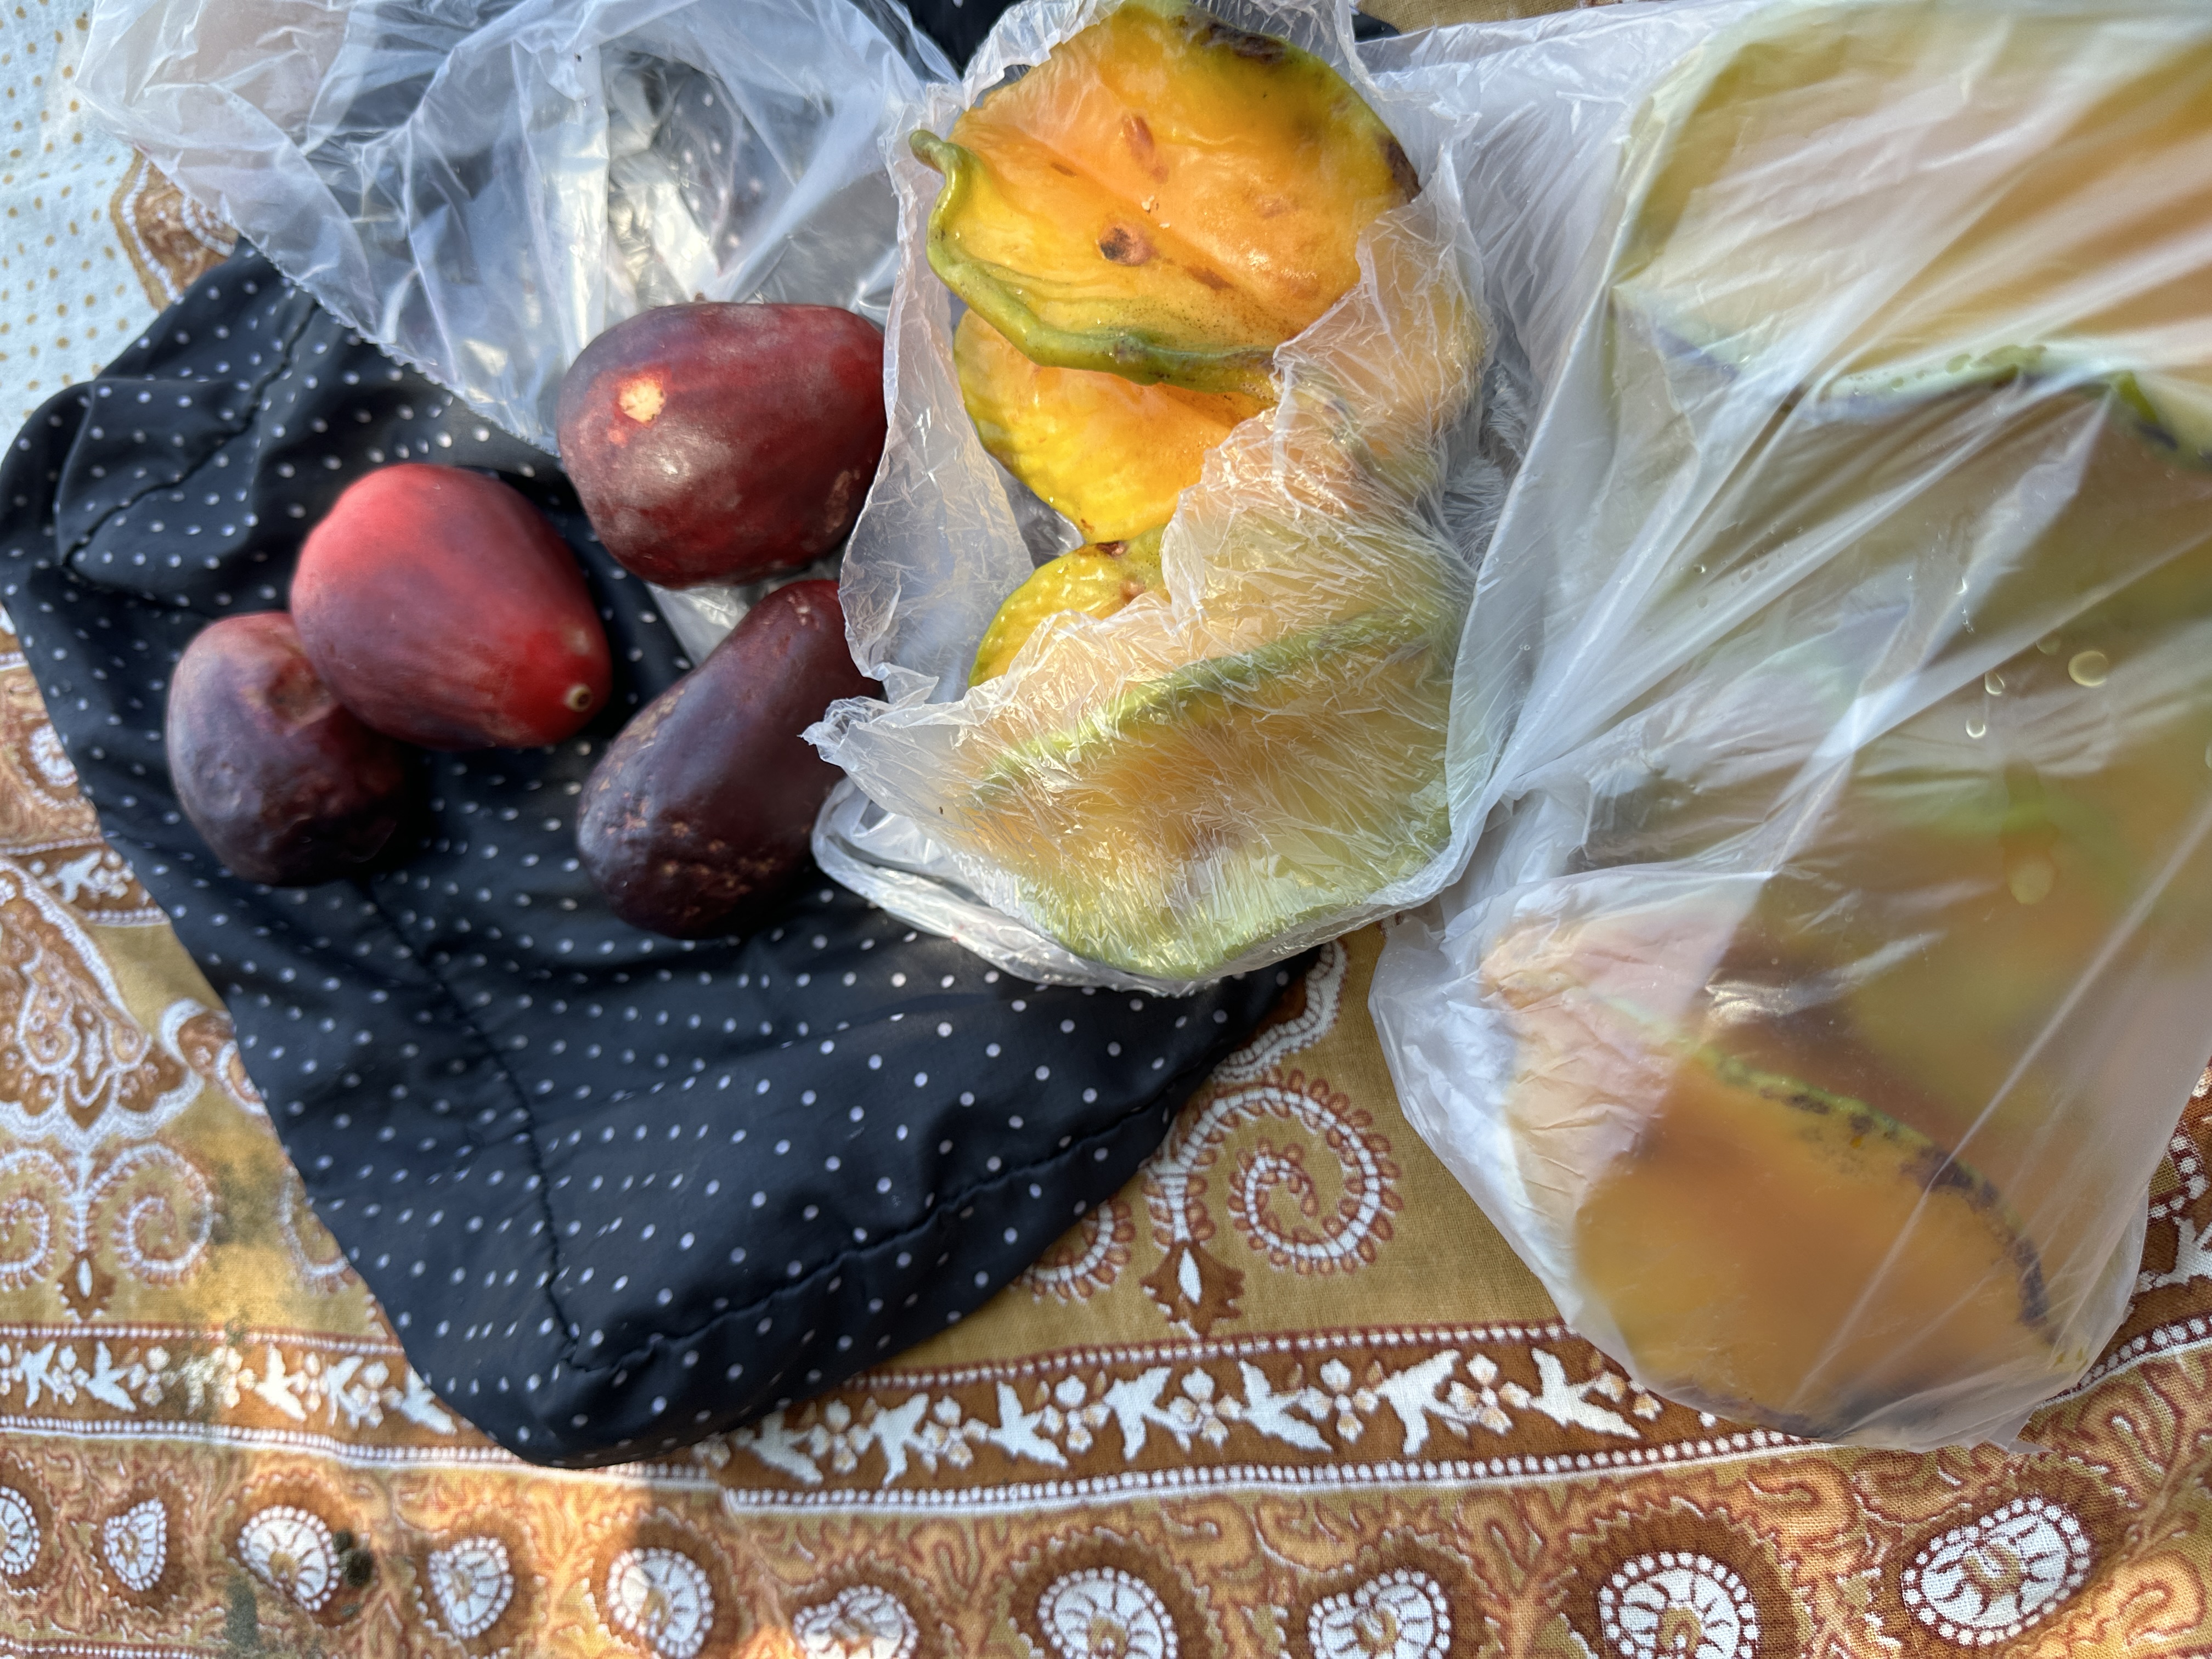 image of star fruit and water apple